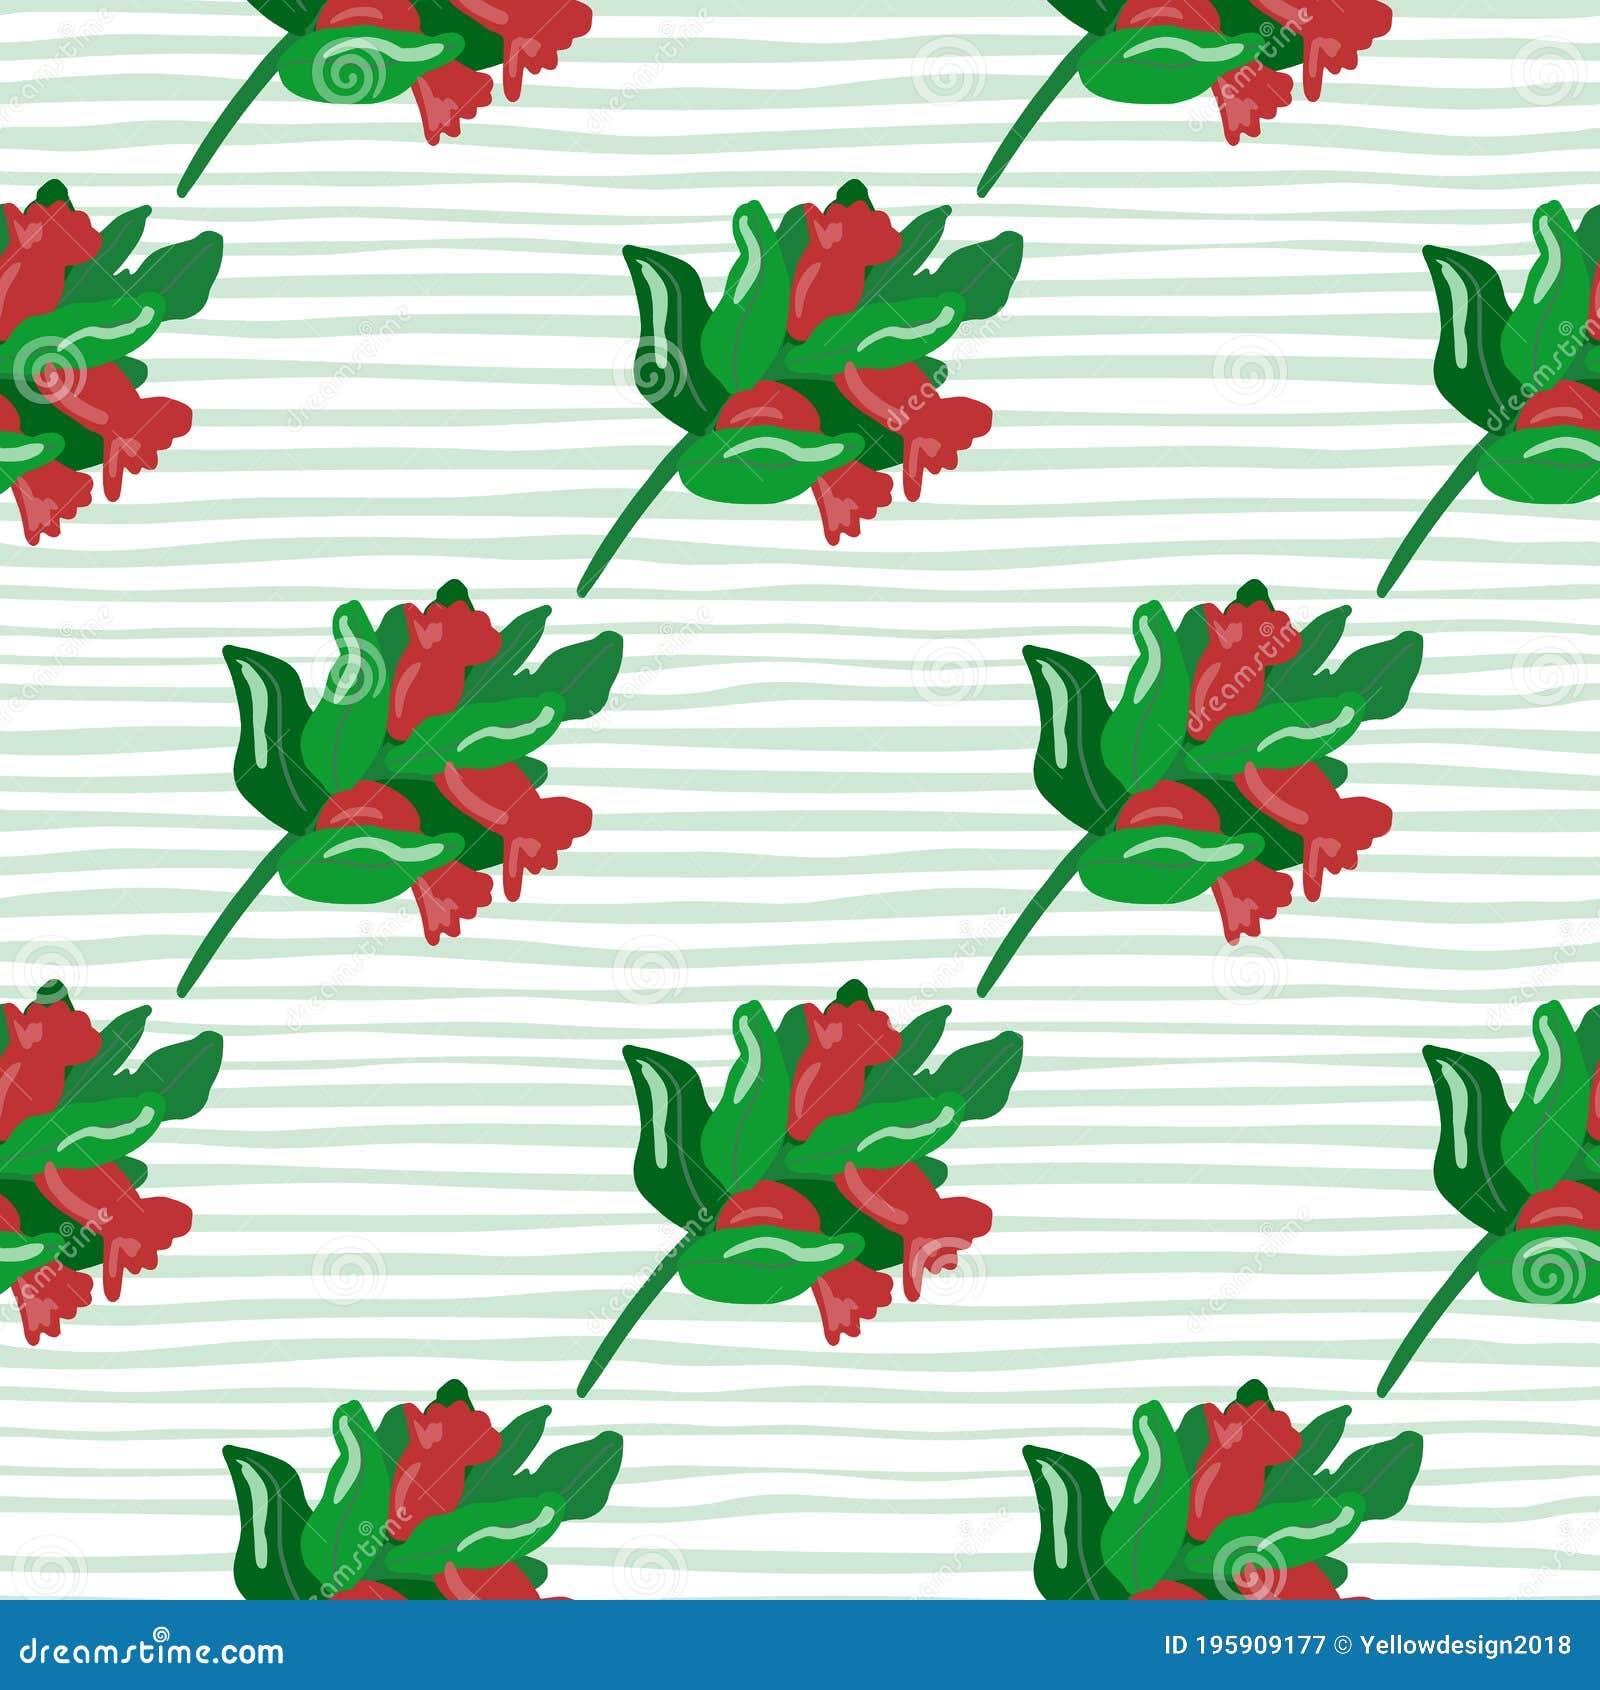 Bright Christmas Print Seamless Pattern With Holly Berry Branches Red And Green Xmas Ornament On Stripped Light Background Stock Illustration Illustration Of Holiday Blossom 195909177